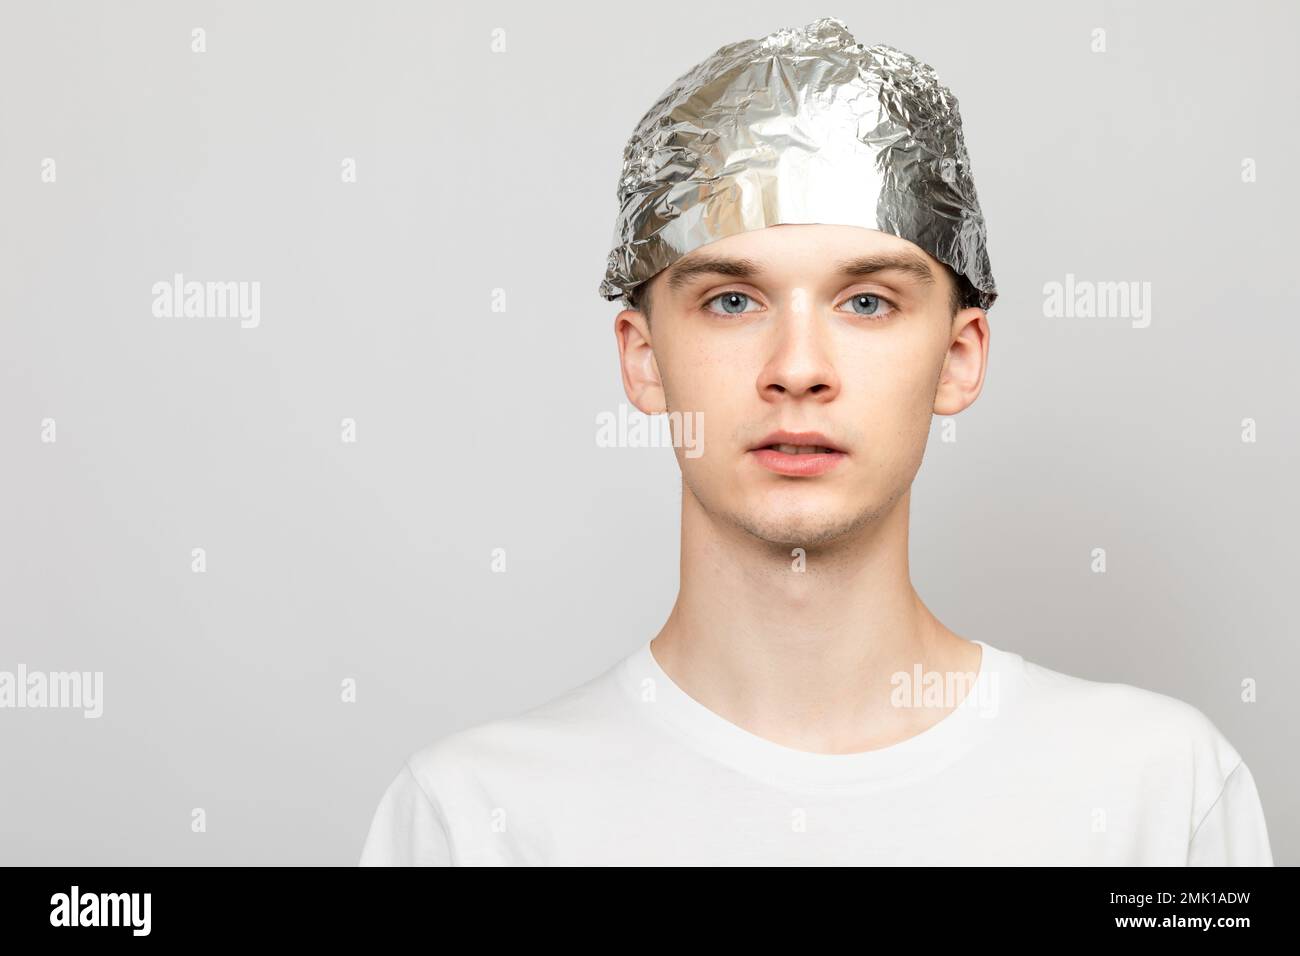 https://c8.alamy.com/comp/2MK1ADW/portrait-of-young-man-wearing-tin-foil-hat-conspiracy-theories-and-paranoya-concept-studio-shot-on-gray-background-2MK1ADW.jpg